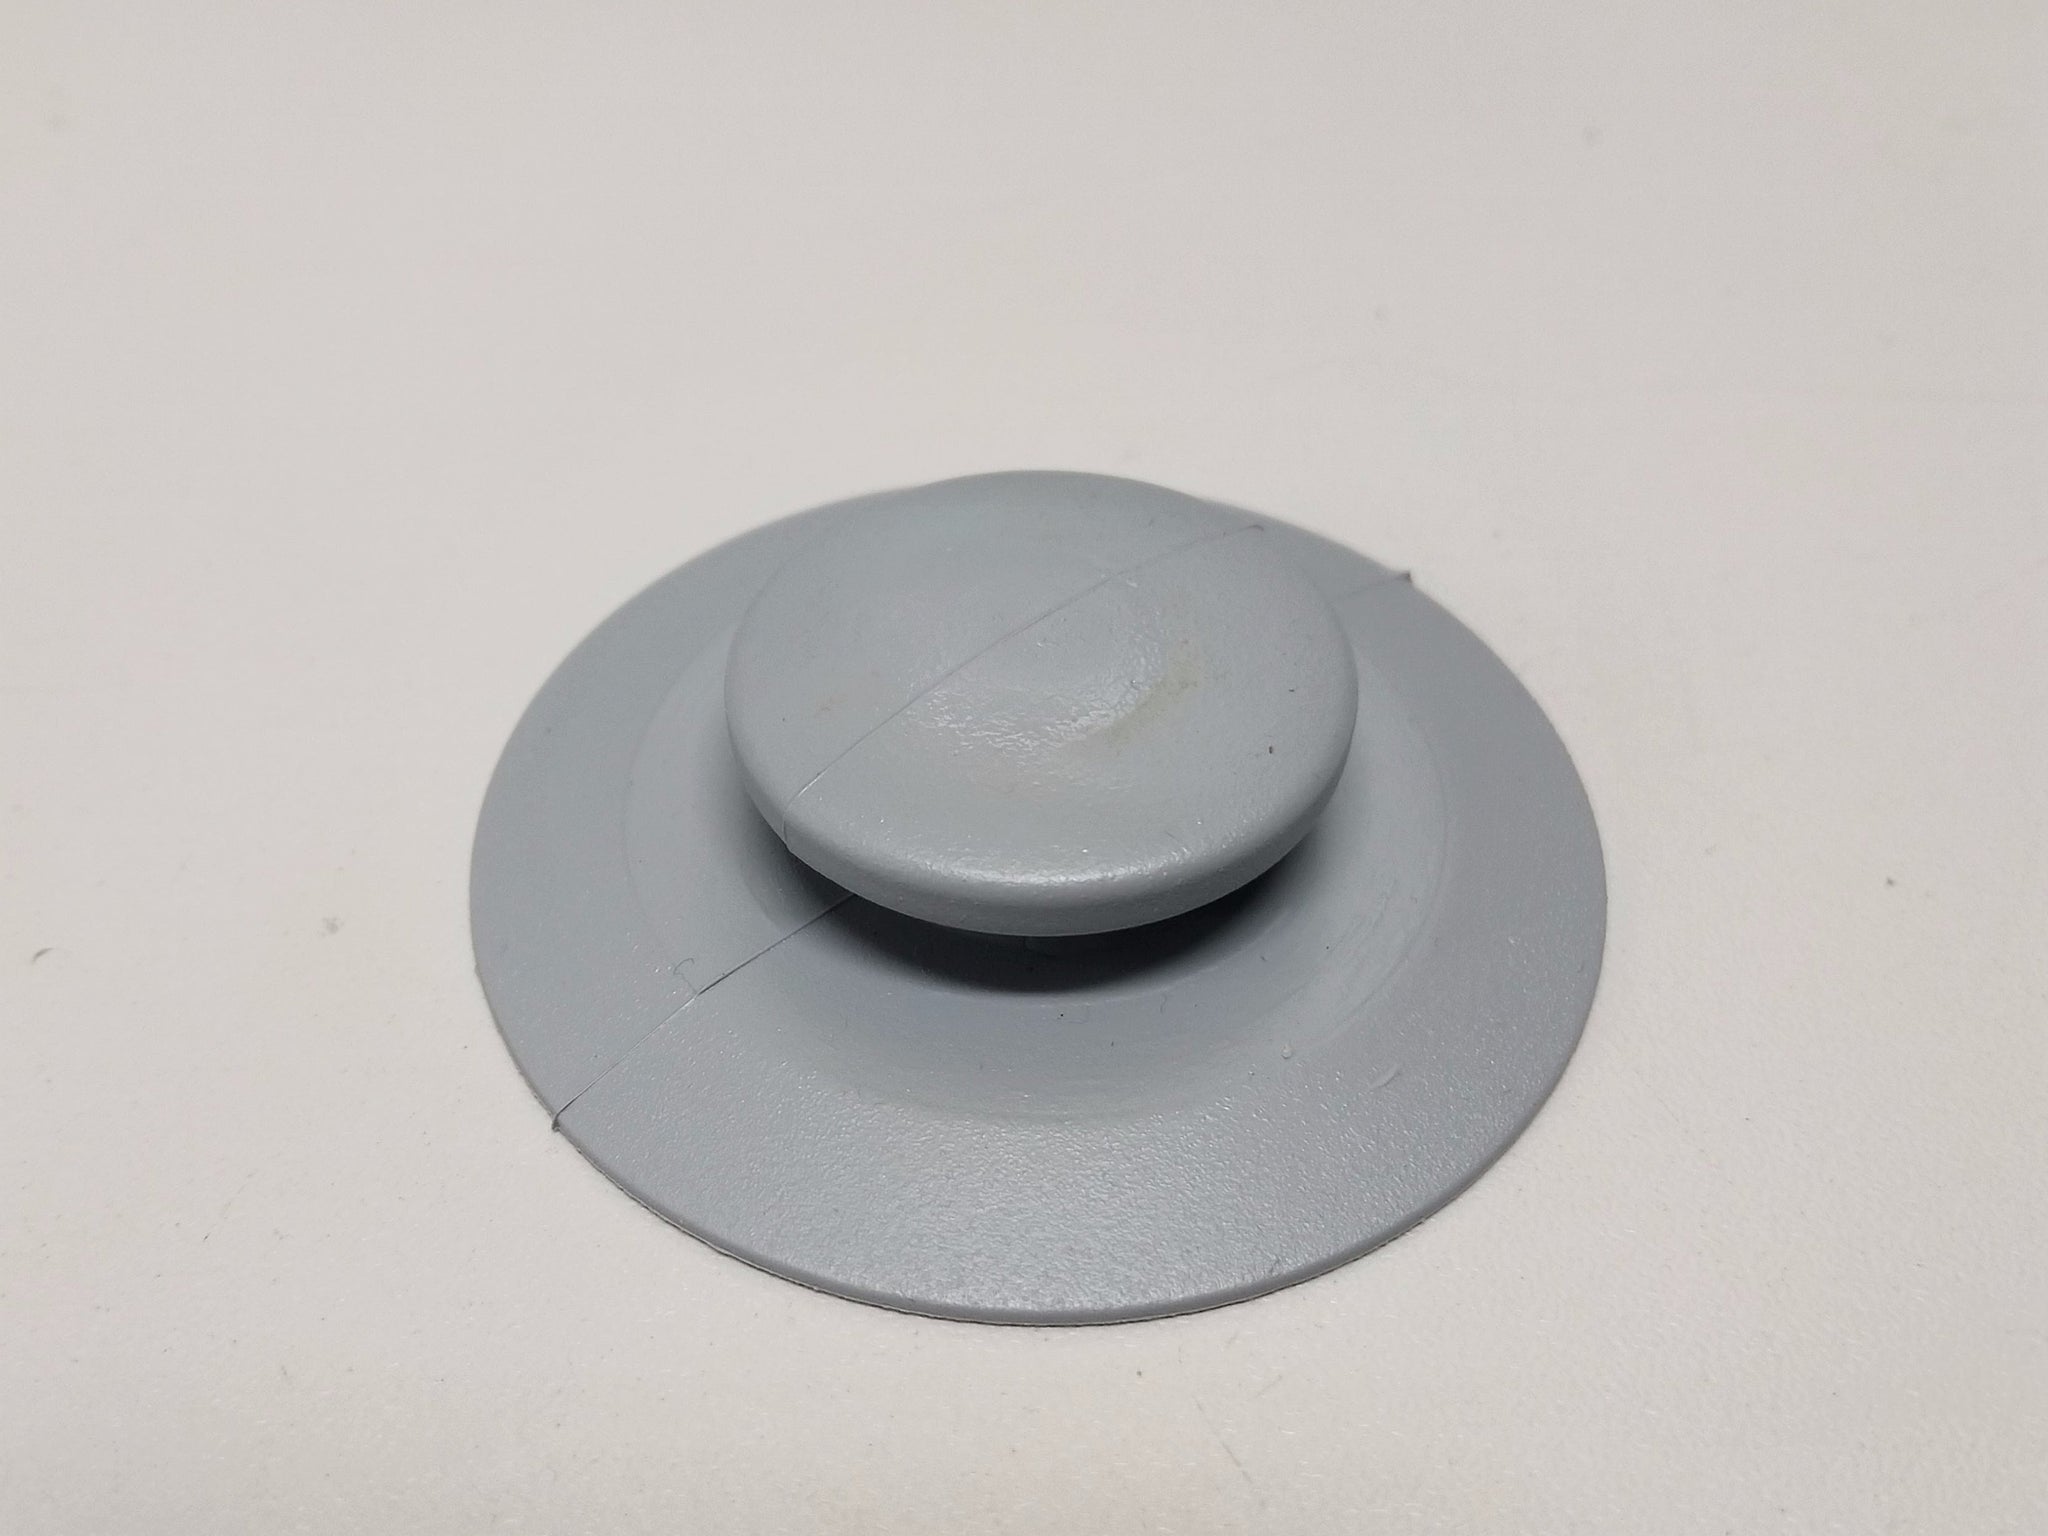 Grey Grommet or Button for attaching Bow Bags and Oar Retaining Clips - Z60725